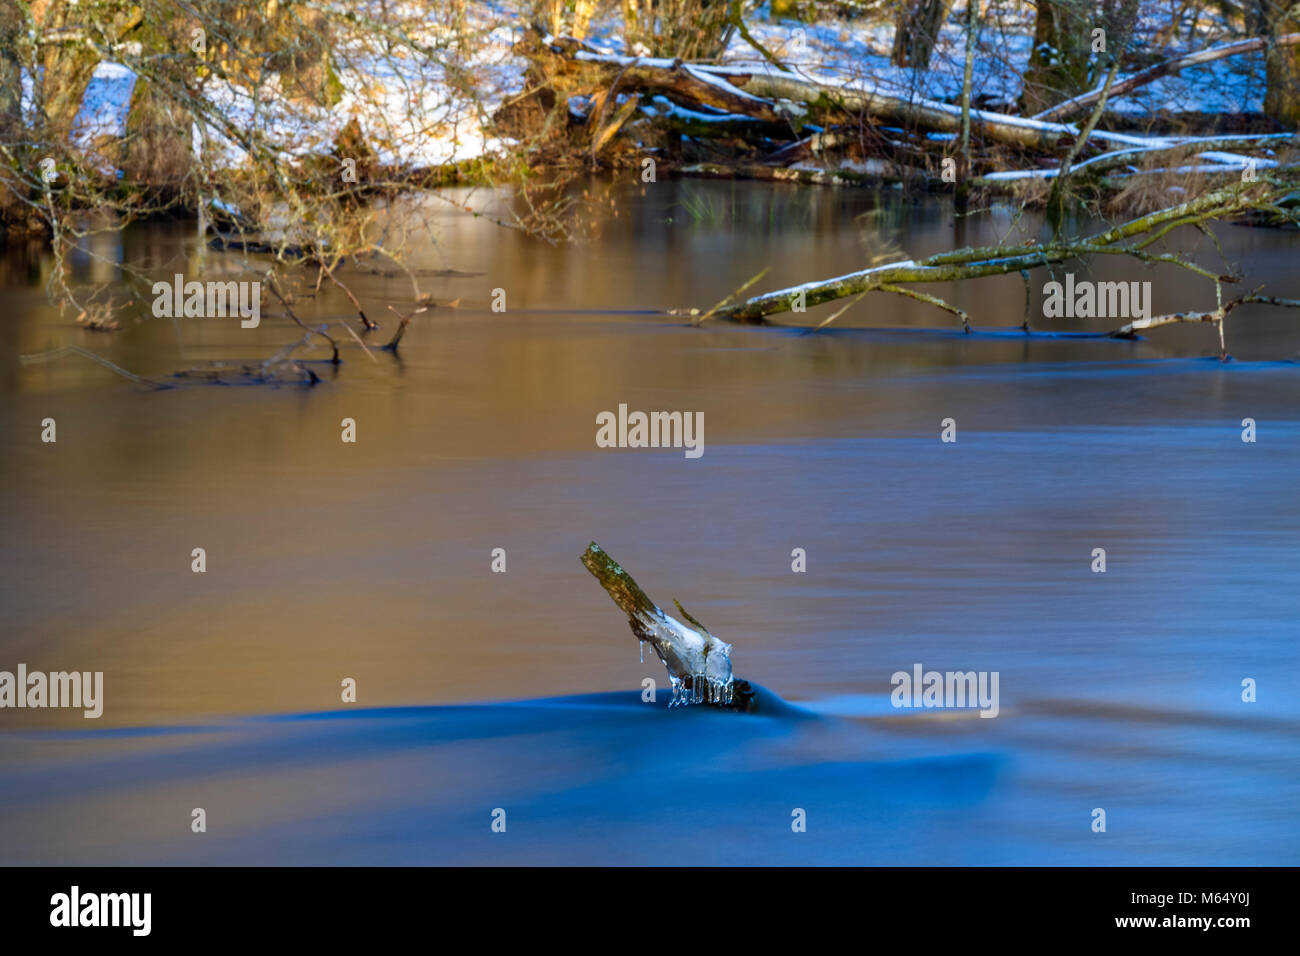 Beautiful long exposure abstract view of tree branch sticking up out of flowing river water  Model Release: No. Property Release: No. Stock Photo